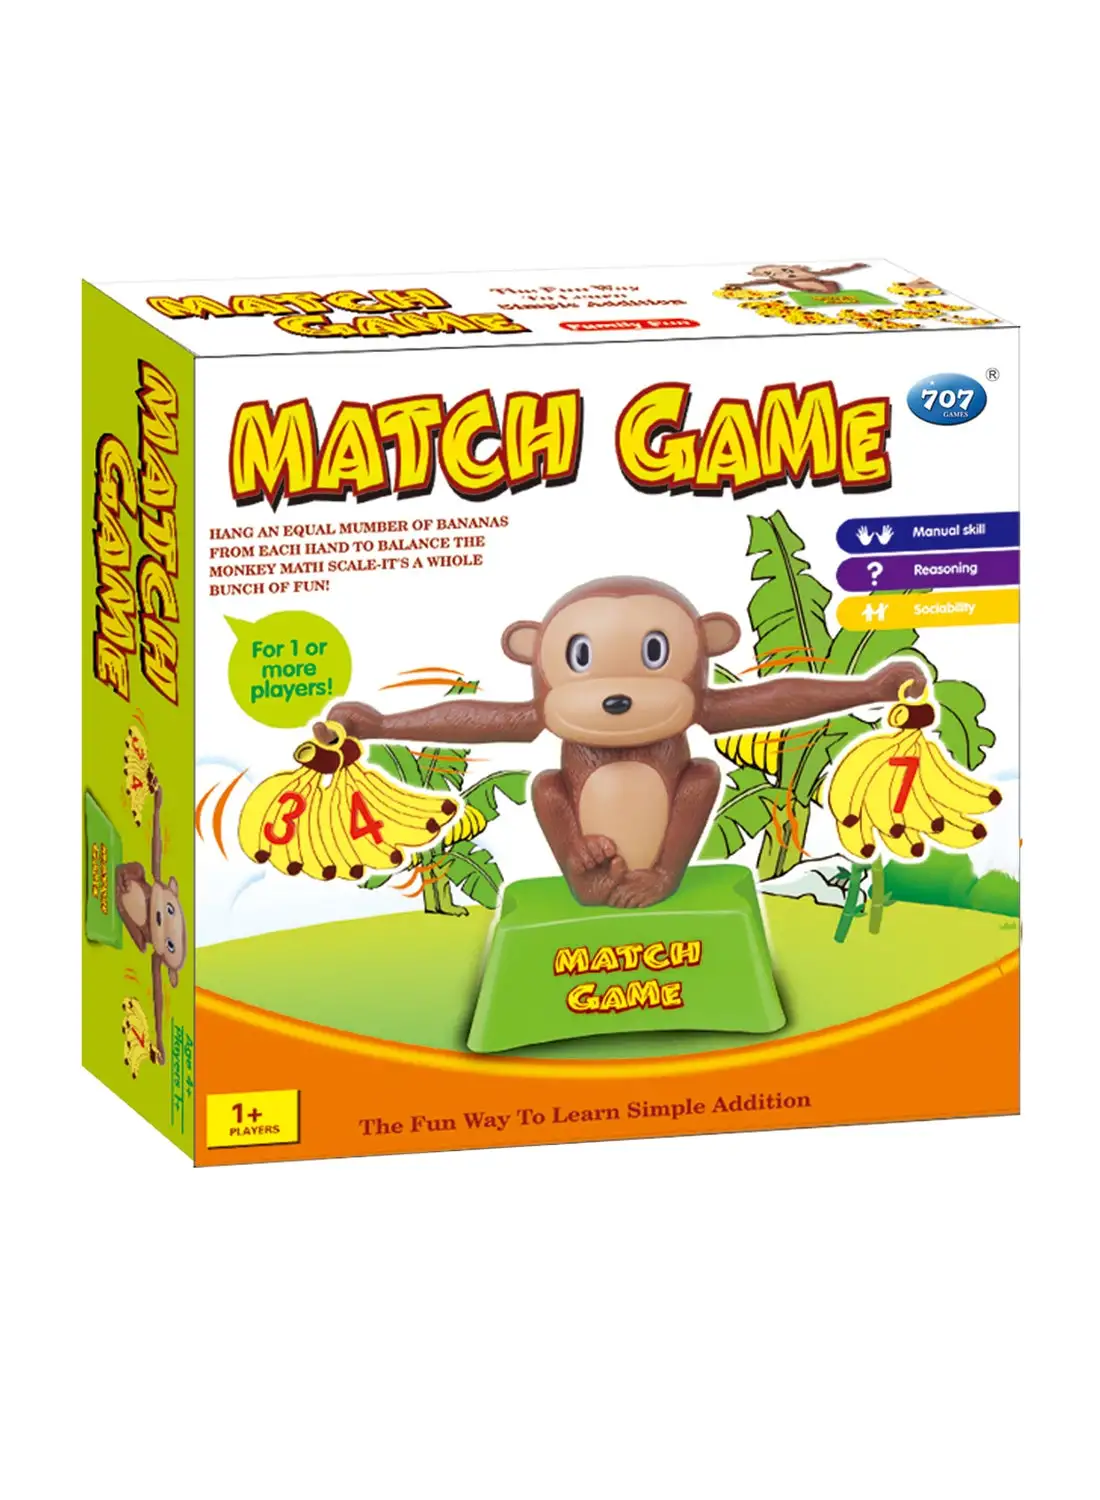 707 Games Match Game